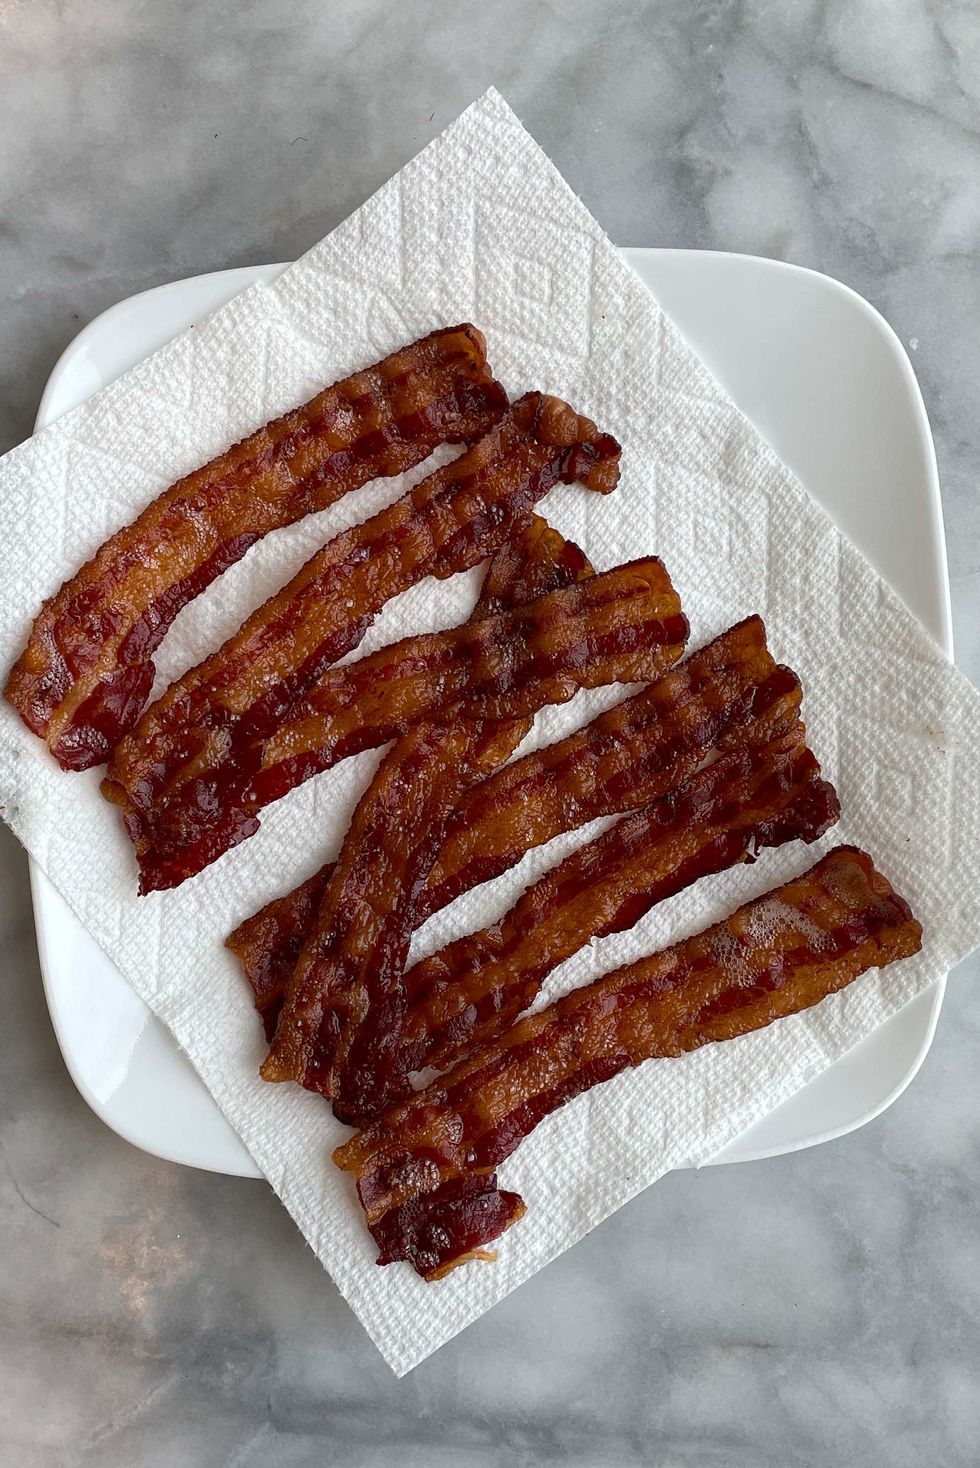 https://hips.hearstapps.com/hmg-prod/images/cooked-bacon-on-plate-jpg-6494664b42736.jpg?crop=0.590xw:0.663xh;0.211xw,0.166xh&resize=980:*